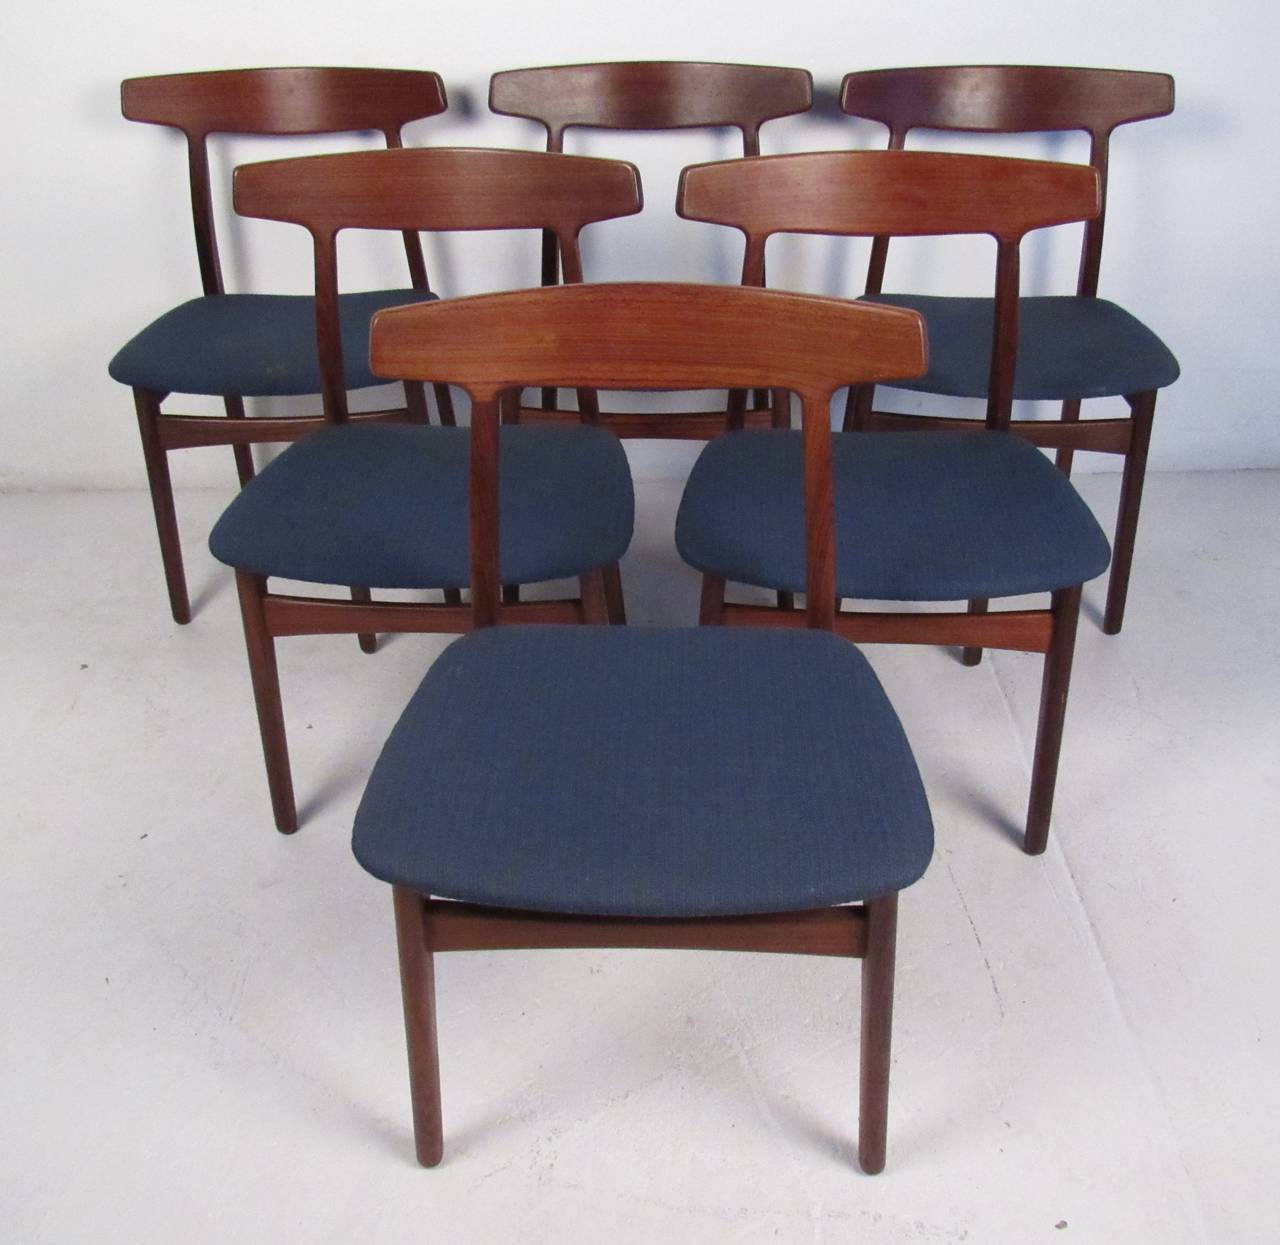 Rare set of six rosewood chairs by Henning Kjaernulf, Denmark, 1955. Beautifully detailed solid rosewood frames with gently curved laminated backrests. Teak draw-leaf dining table expands from 57